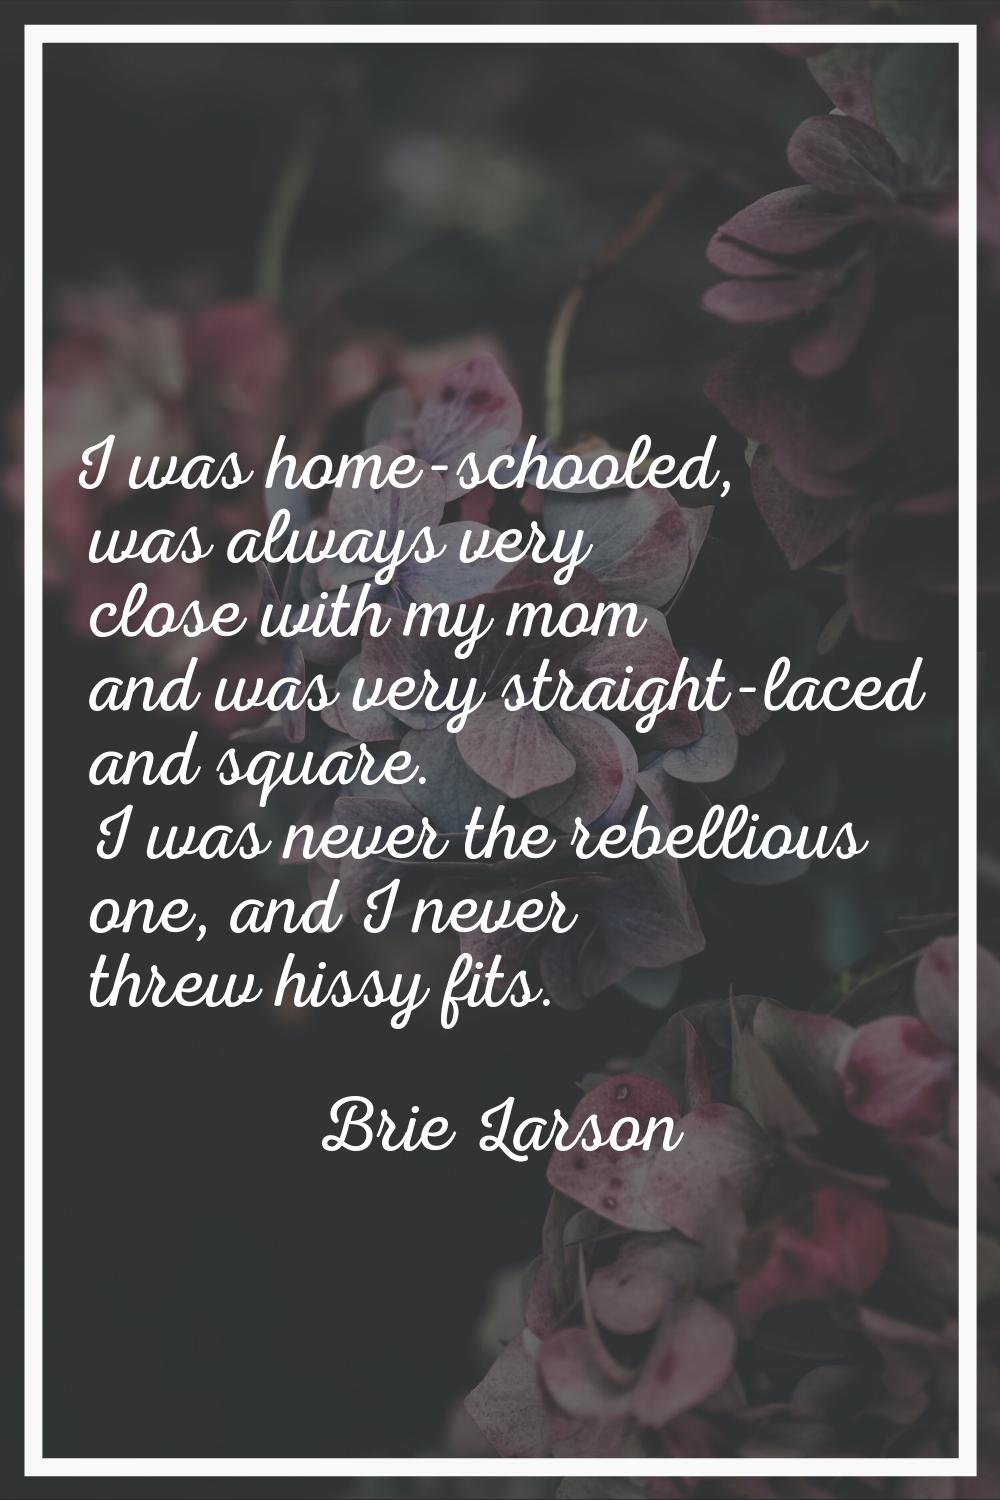 I was home-schooled, was always very close with my mom and was very straight-laced and square. I wa